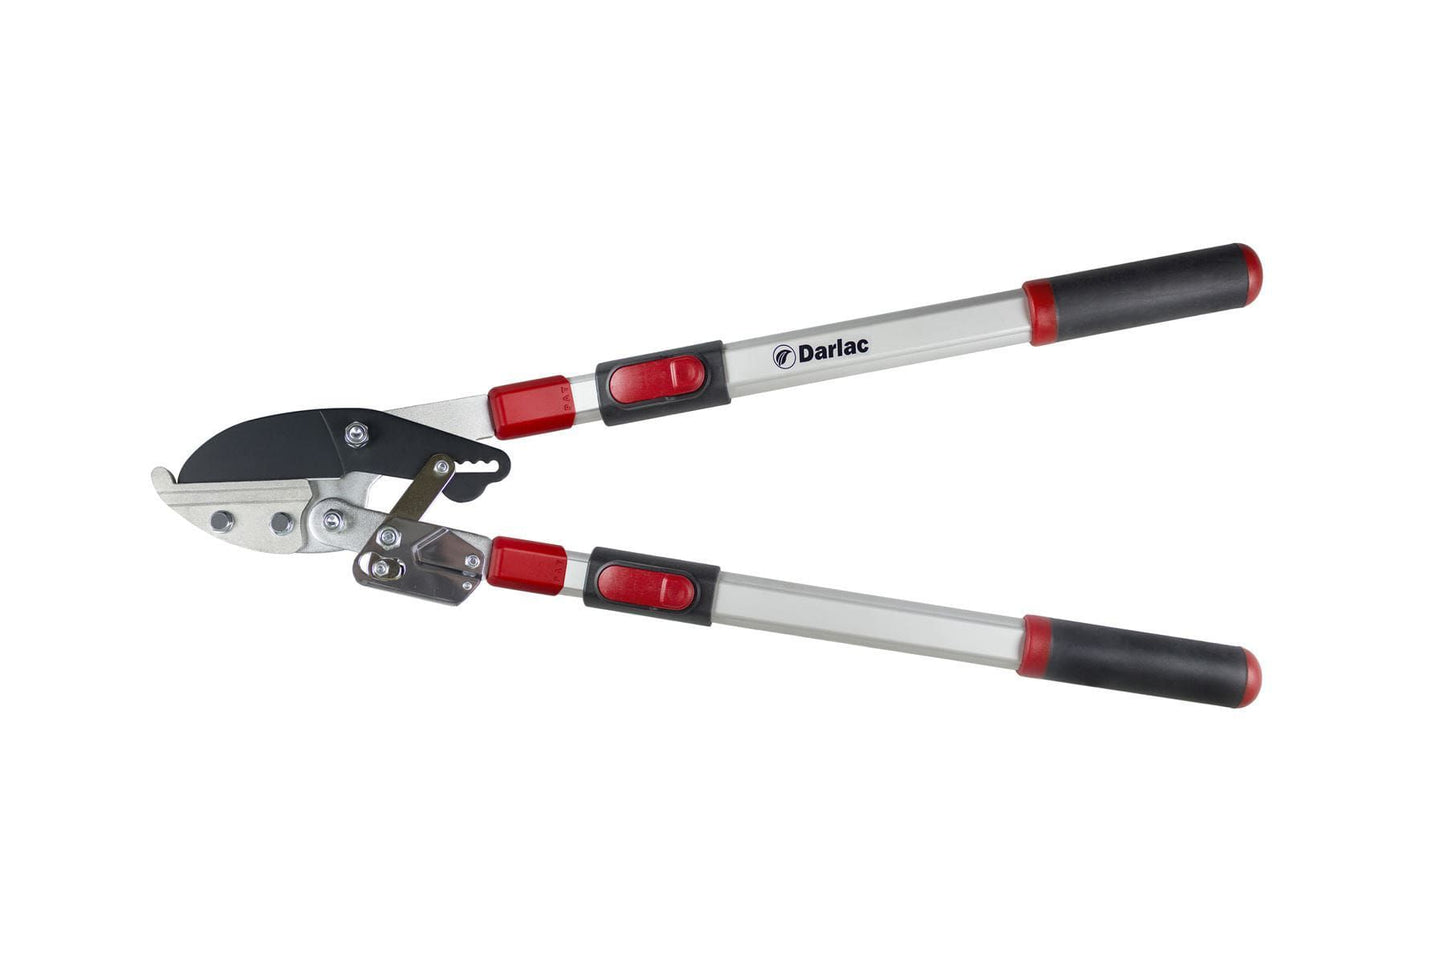 Darlac DP474A Telescopic Ratchet lopper Tree Pruner Max Cut 50mm UK SHIPPING ONLY